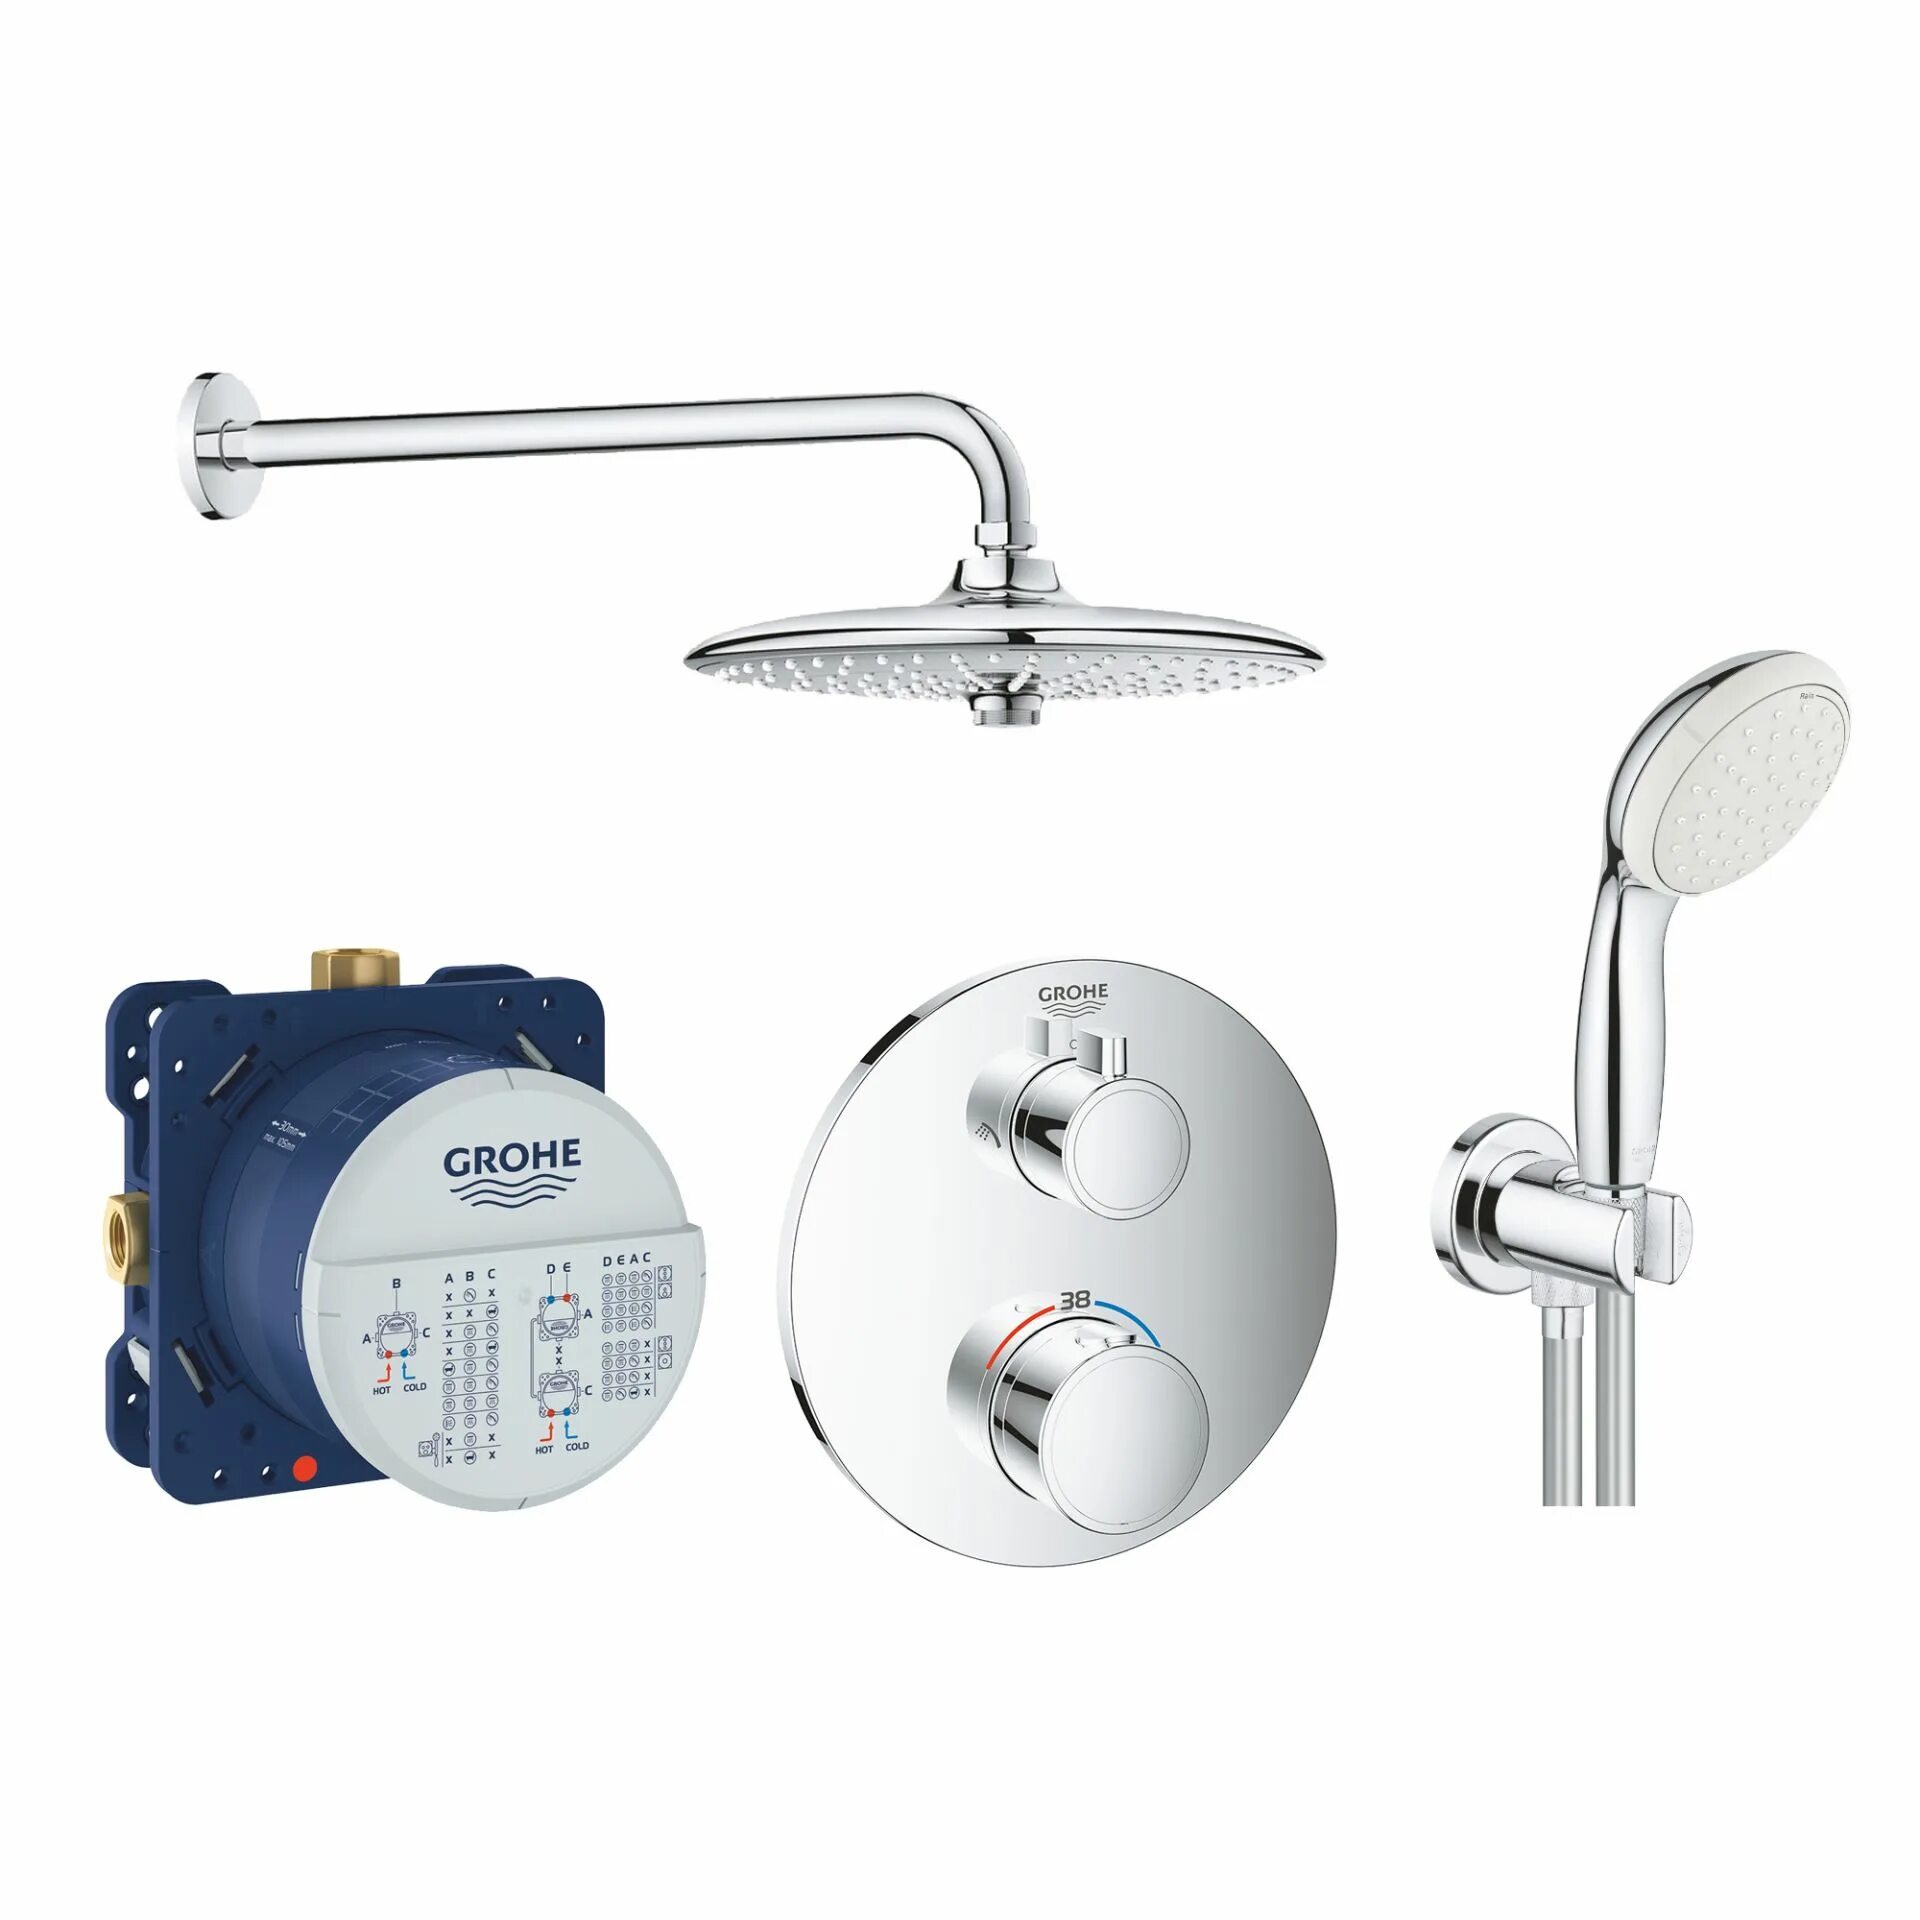 Grohe Grohtherm SMARTCONTROL 29121000. 26483000 Grohe. Grohe Grohtherm SMARTCONTROL. Смеситель Grohe SMARTCONTROL.